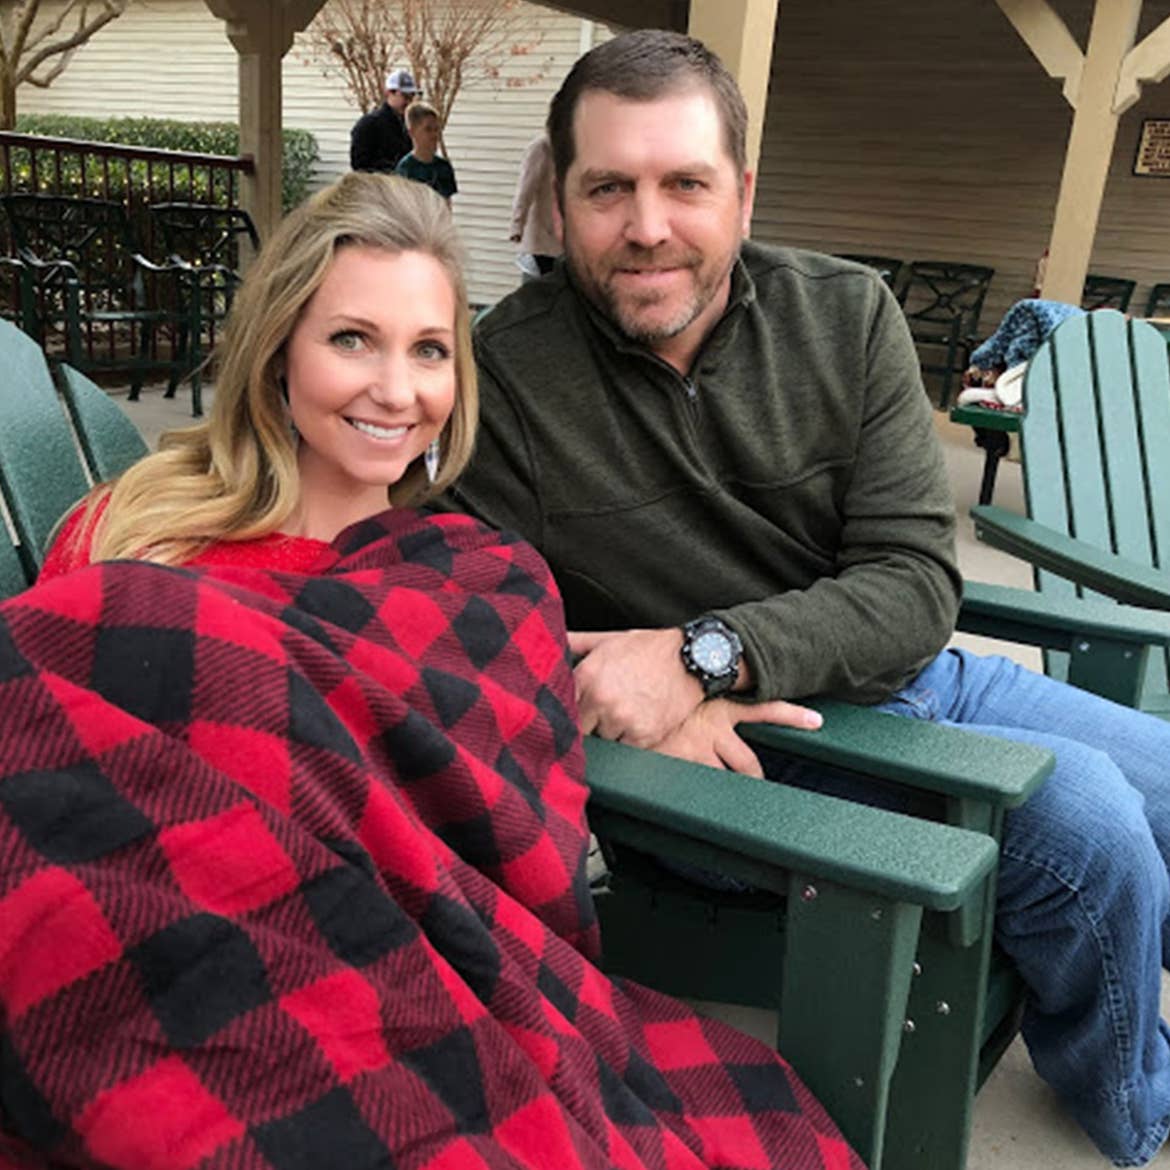 Author, Amanda Nall (left) sits under a cozy festive throw blanket with her husband outdoors.